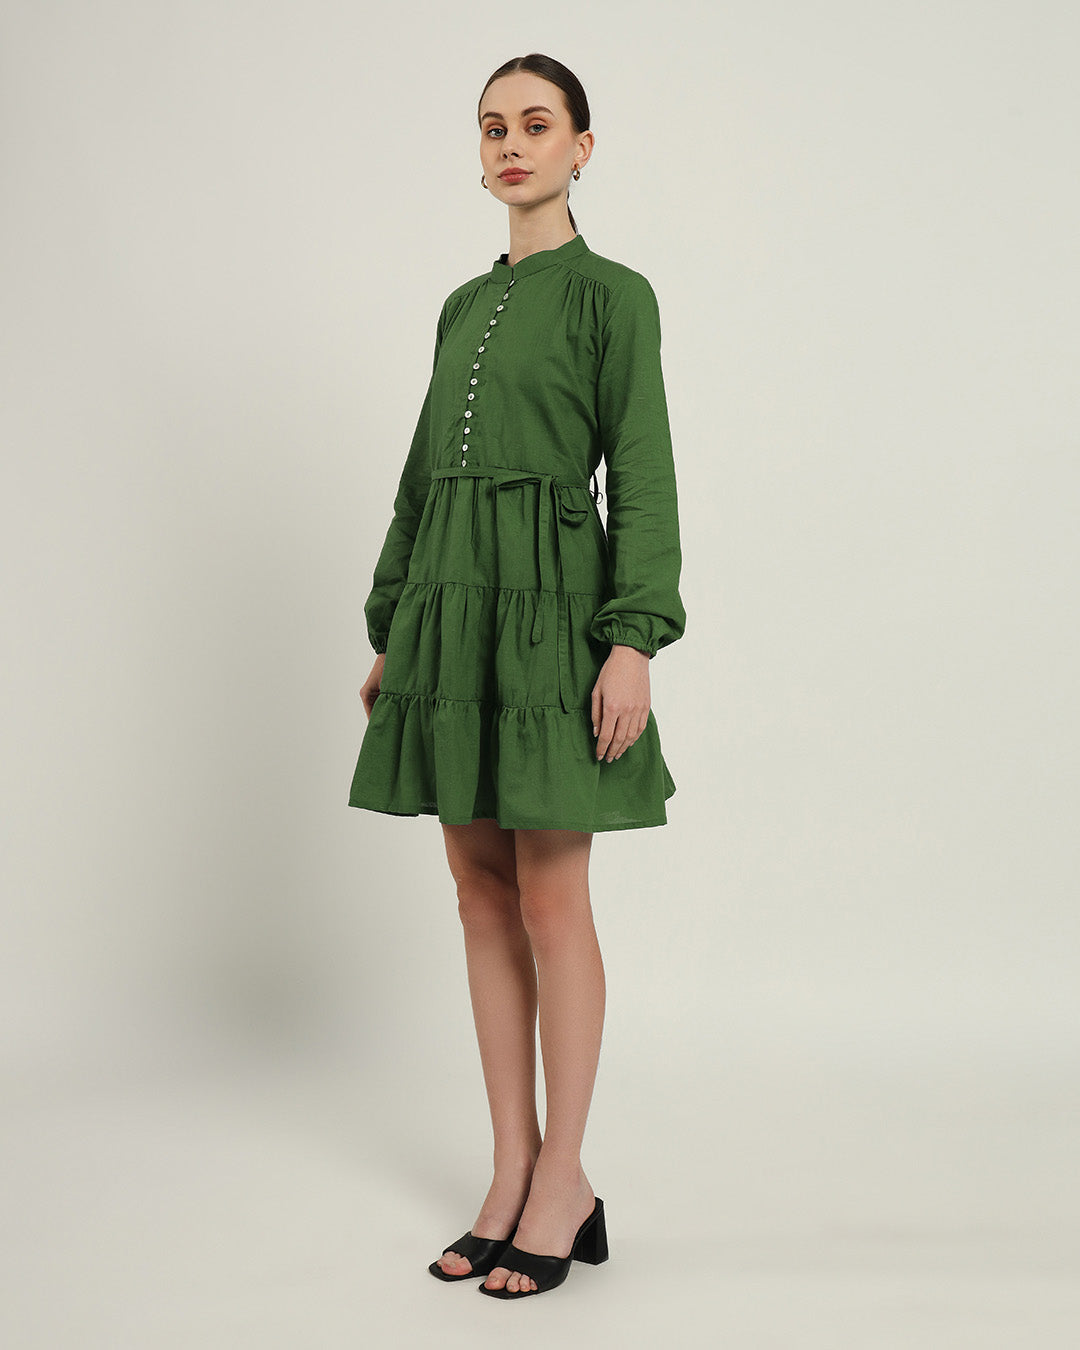 The Ely Emerald Dress